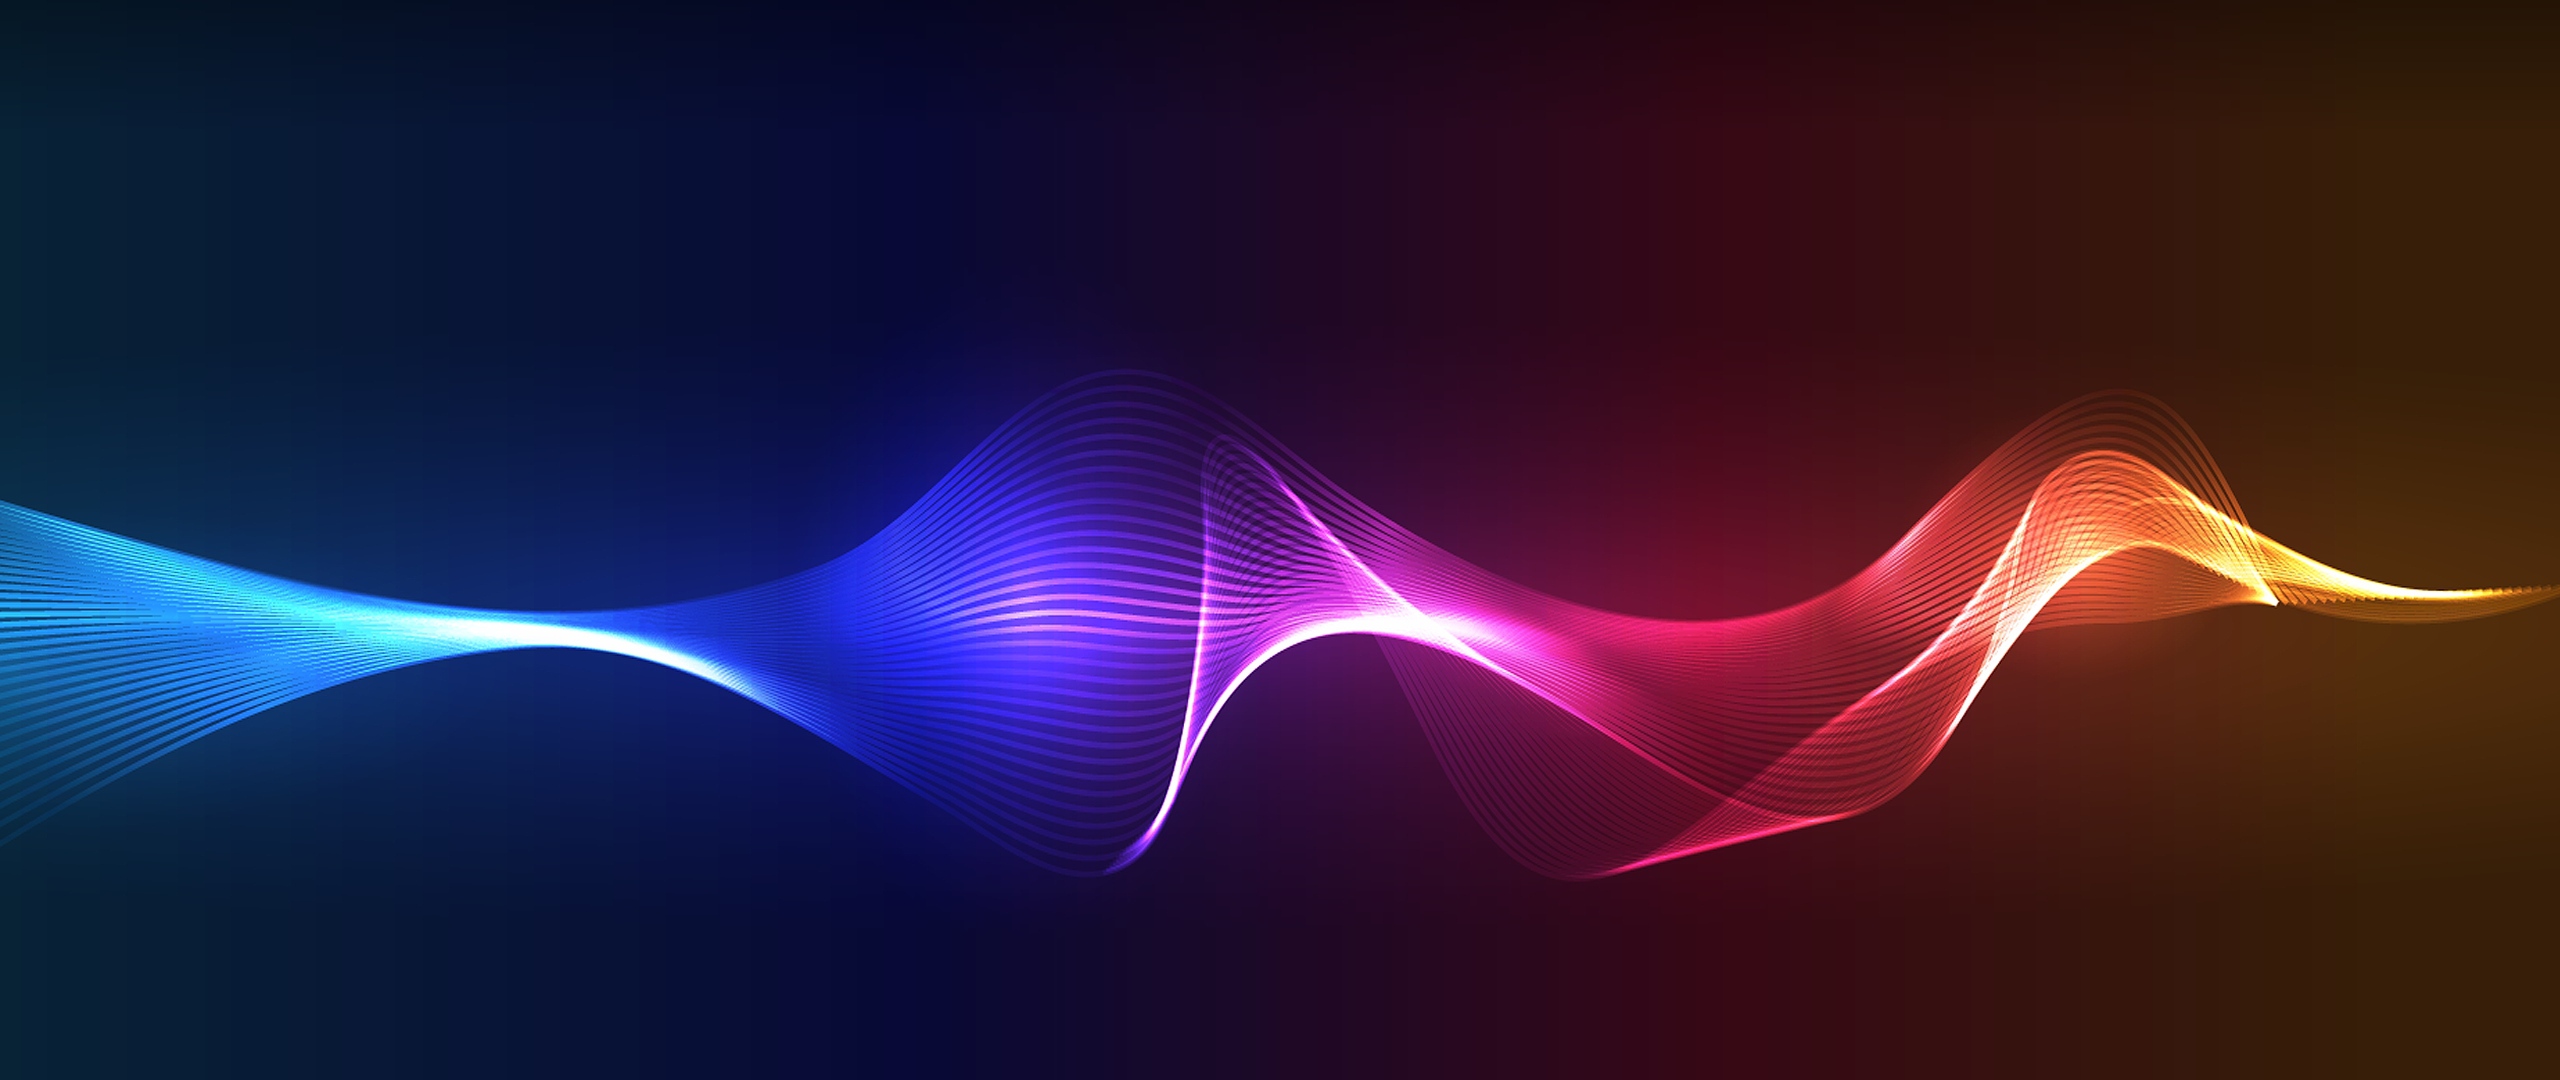 Download Wallpaper 2560x1080 Wavy, Lines, Colorful, Background ...